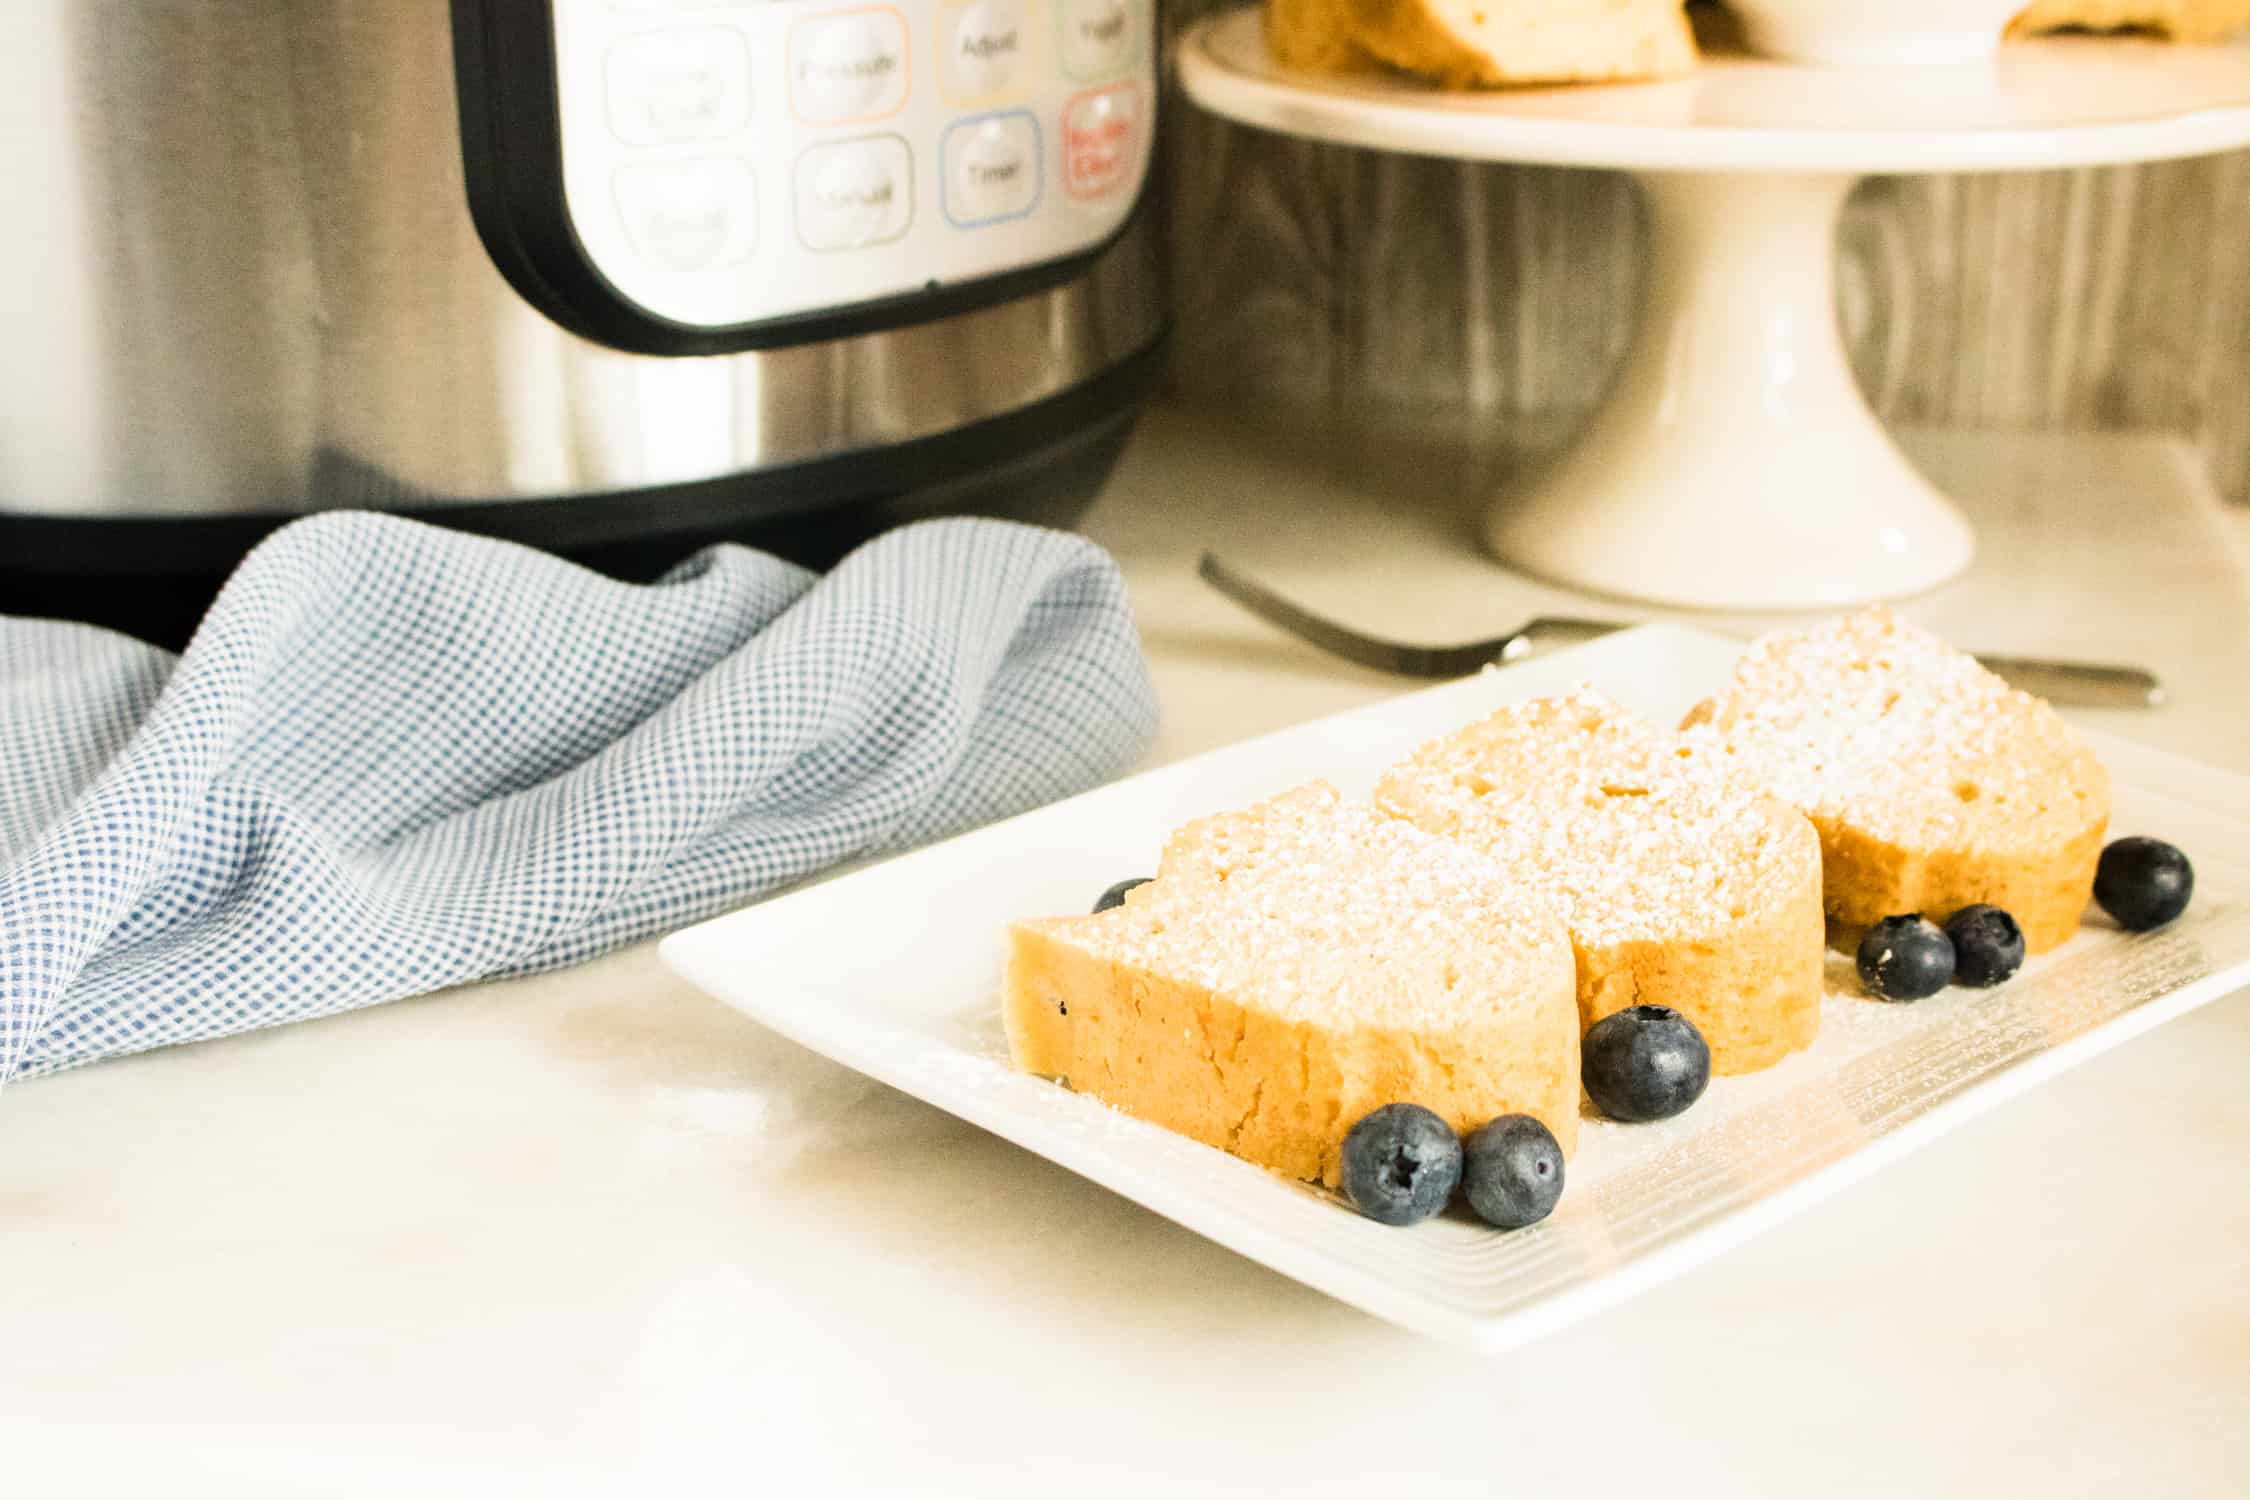 instant pot pound cake recipe on rectangular white plate in forefront with silver instant pot in background and white pedestal cake holder with cake on it to the right background